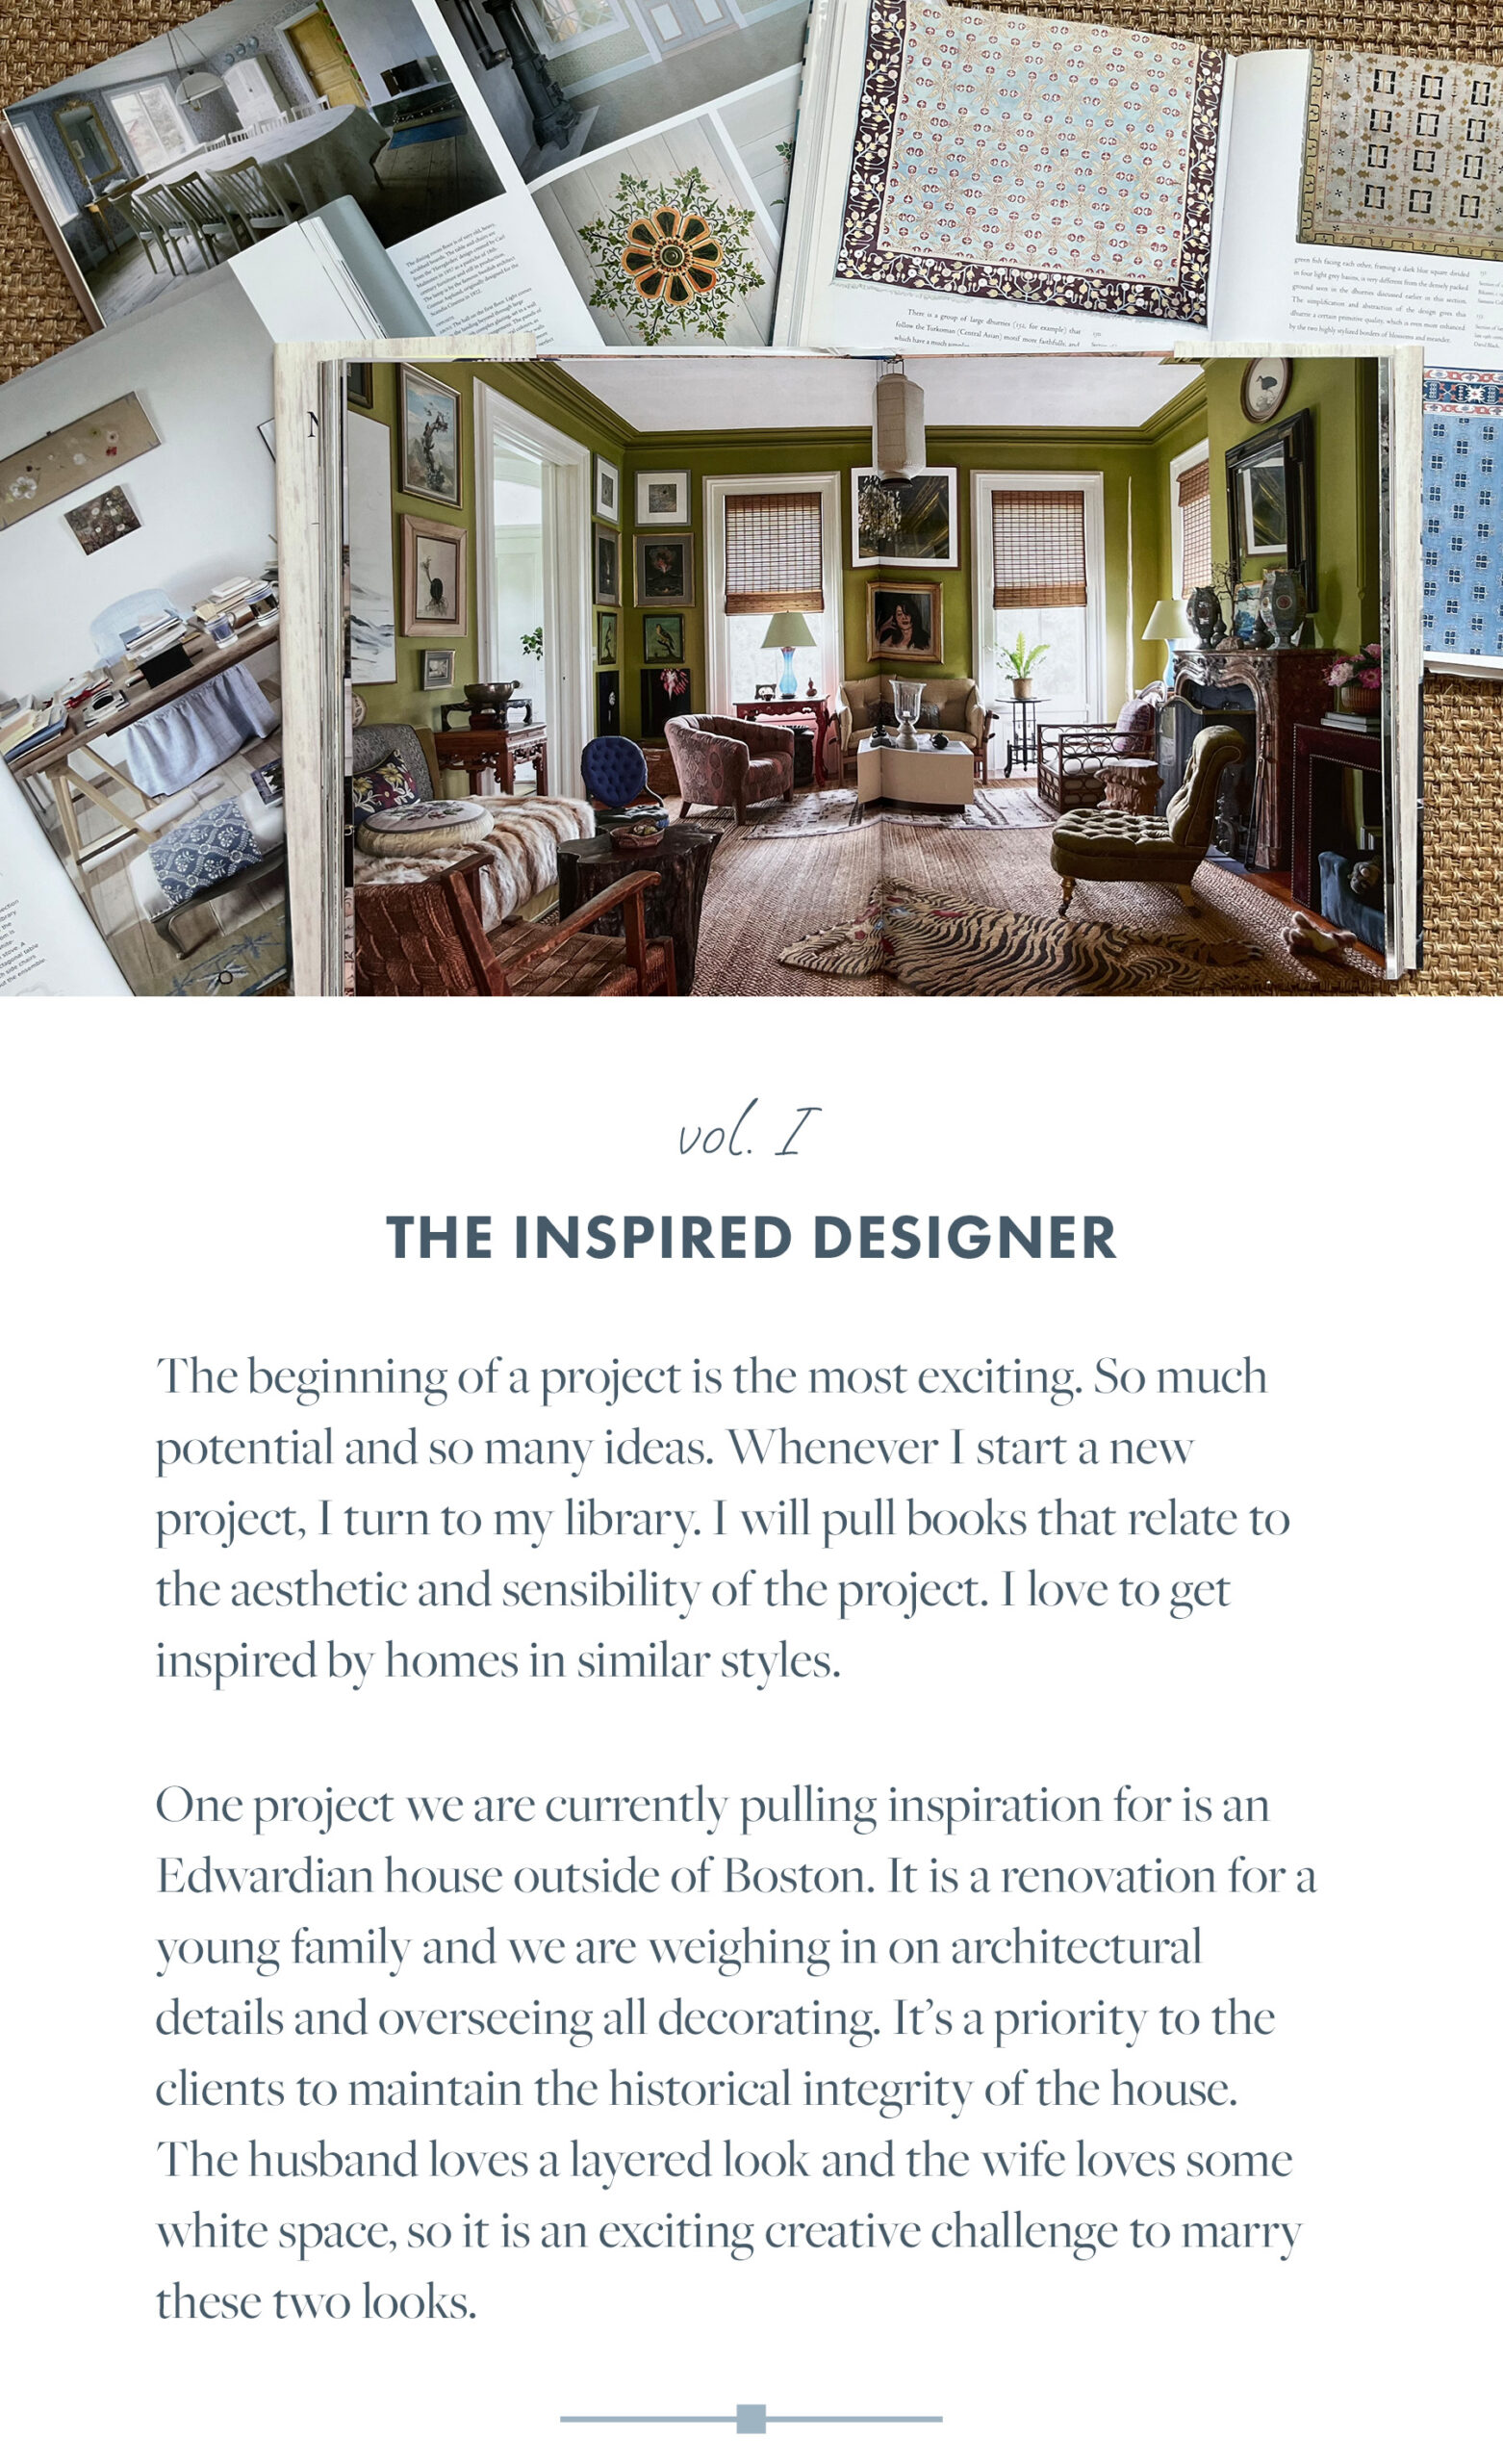 The beginning of a project is the most exciting. So much potential and so many ideas. Whenever I start a new project, I turn to my library. I will pull books that relate to the aesthetic and sensibility of the project. I love to get inspired by homes in similar stvles. One project we are currently pulling inspiration for is an Edwardian house outside of Boston. It is a renovation for a young family and we are weighing in on architectural details and oversecing all decorating. It's a priority to the clients to maintain the historical integrity of the house. The husband loves a lavered look and the wife loves some white space, so it is an exciting creative challenge to marry these two looks.